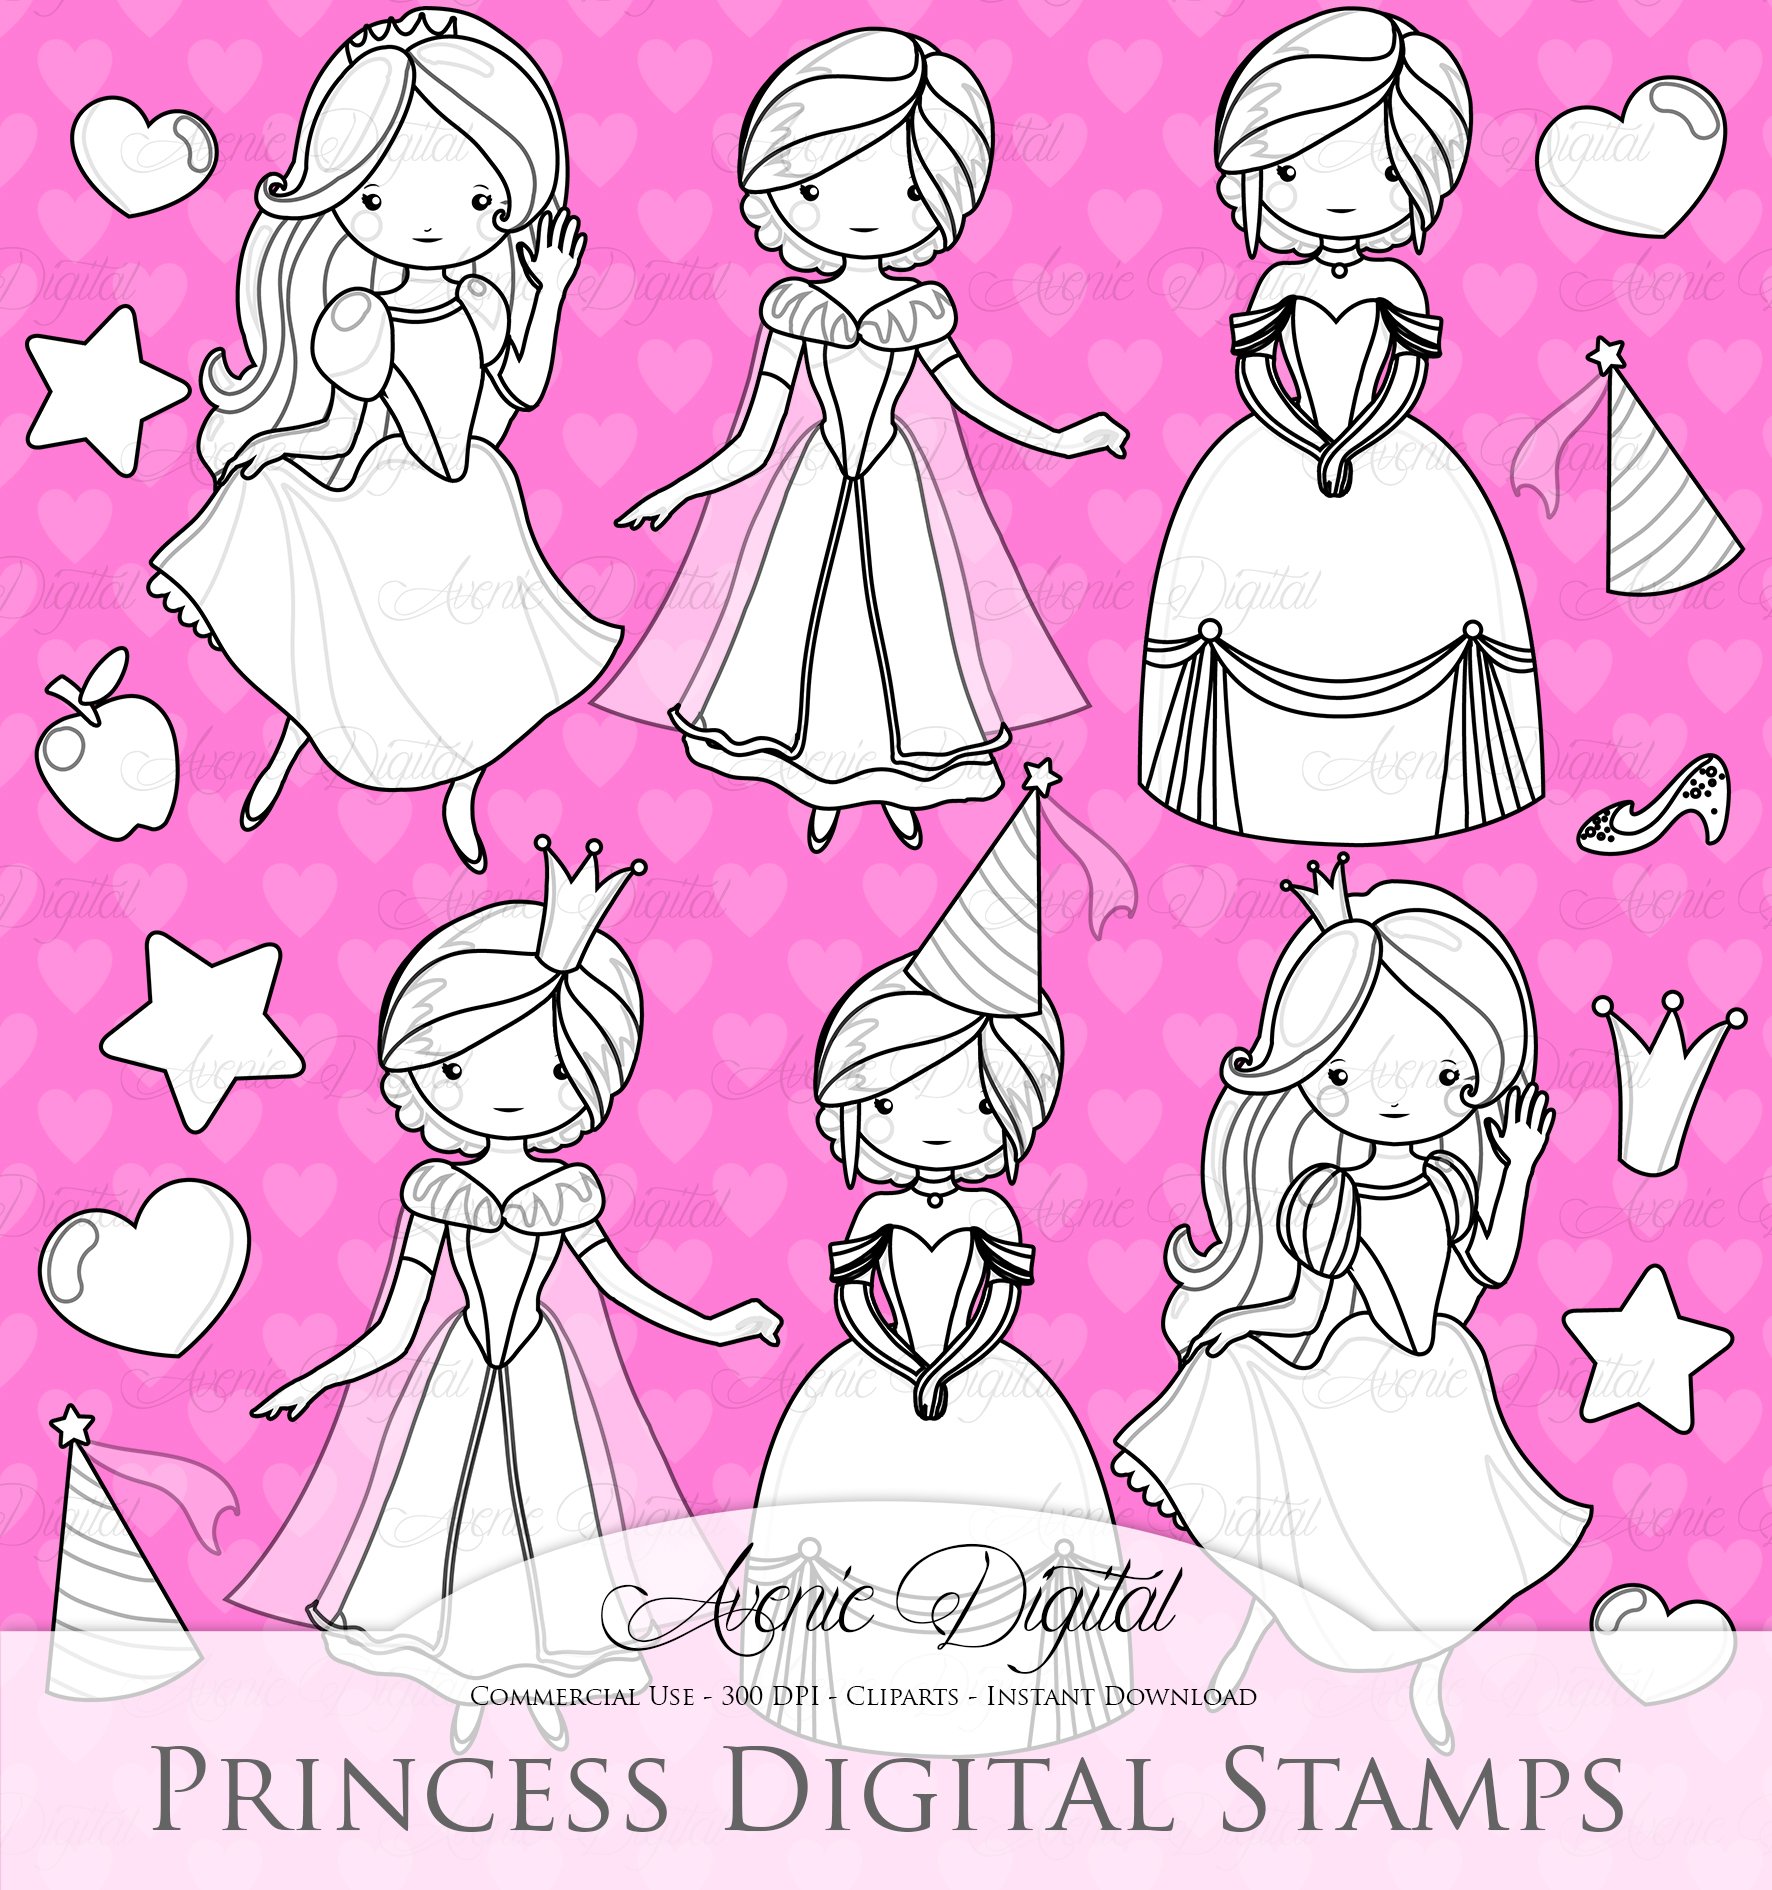 Fairytale Princess Digital Stamps cover image.